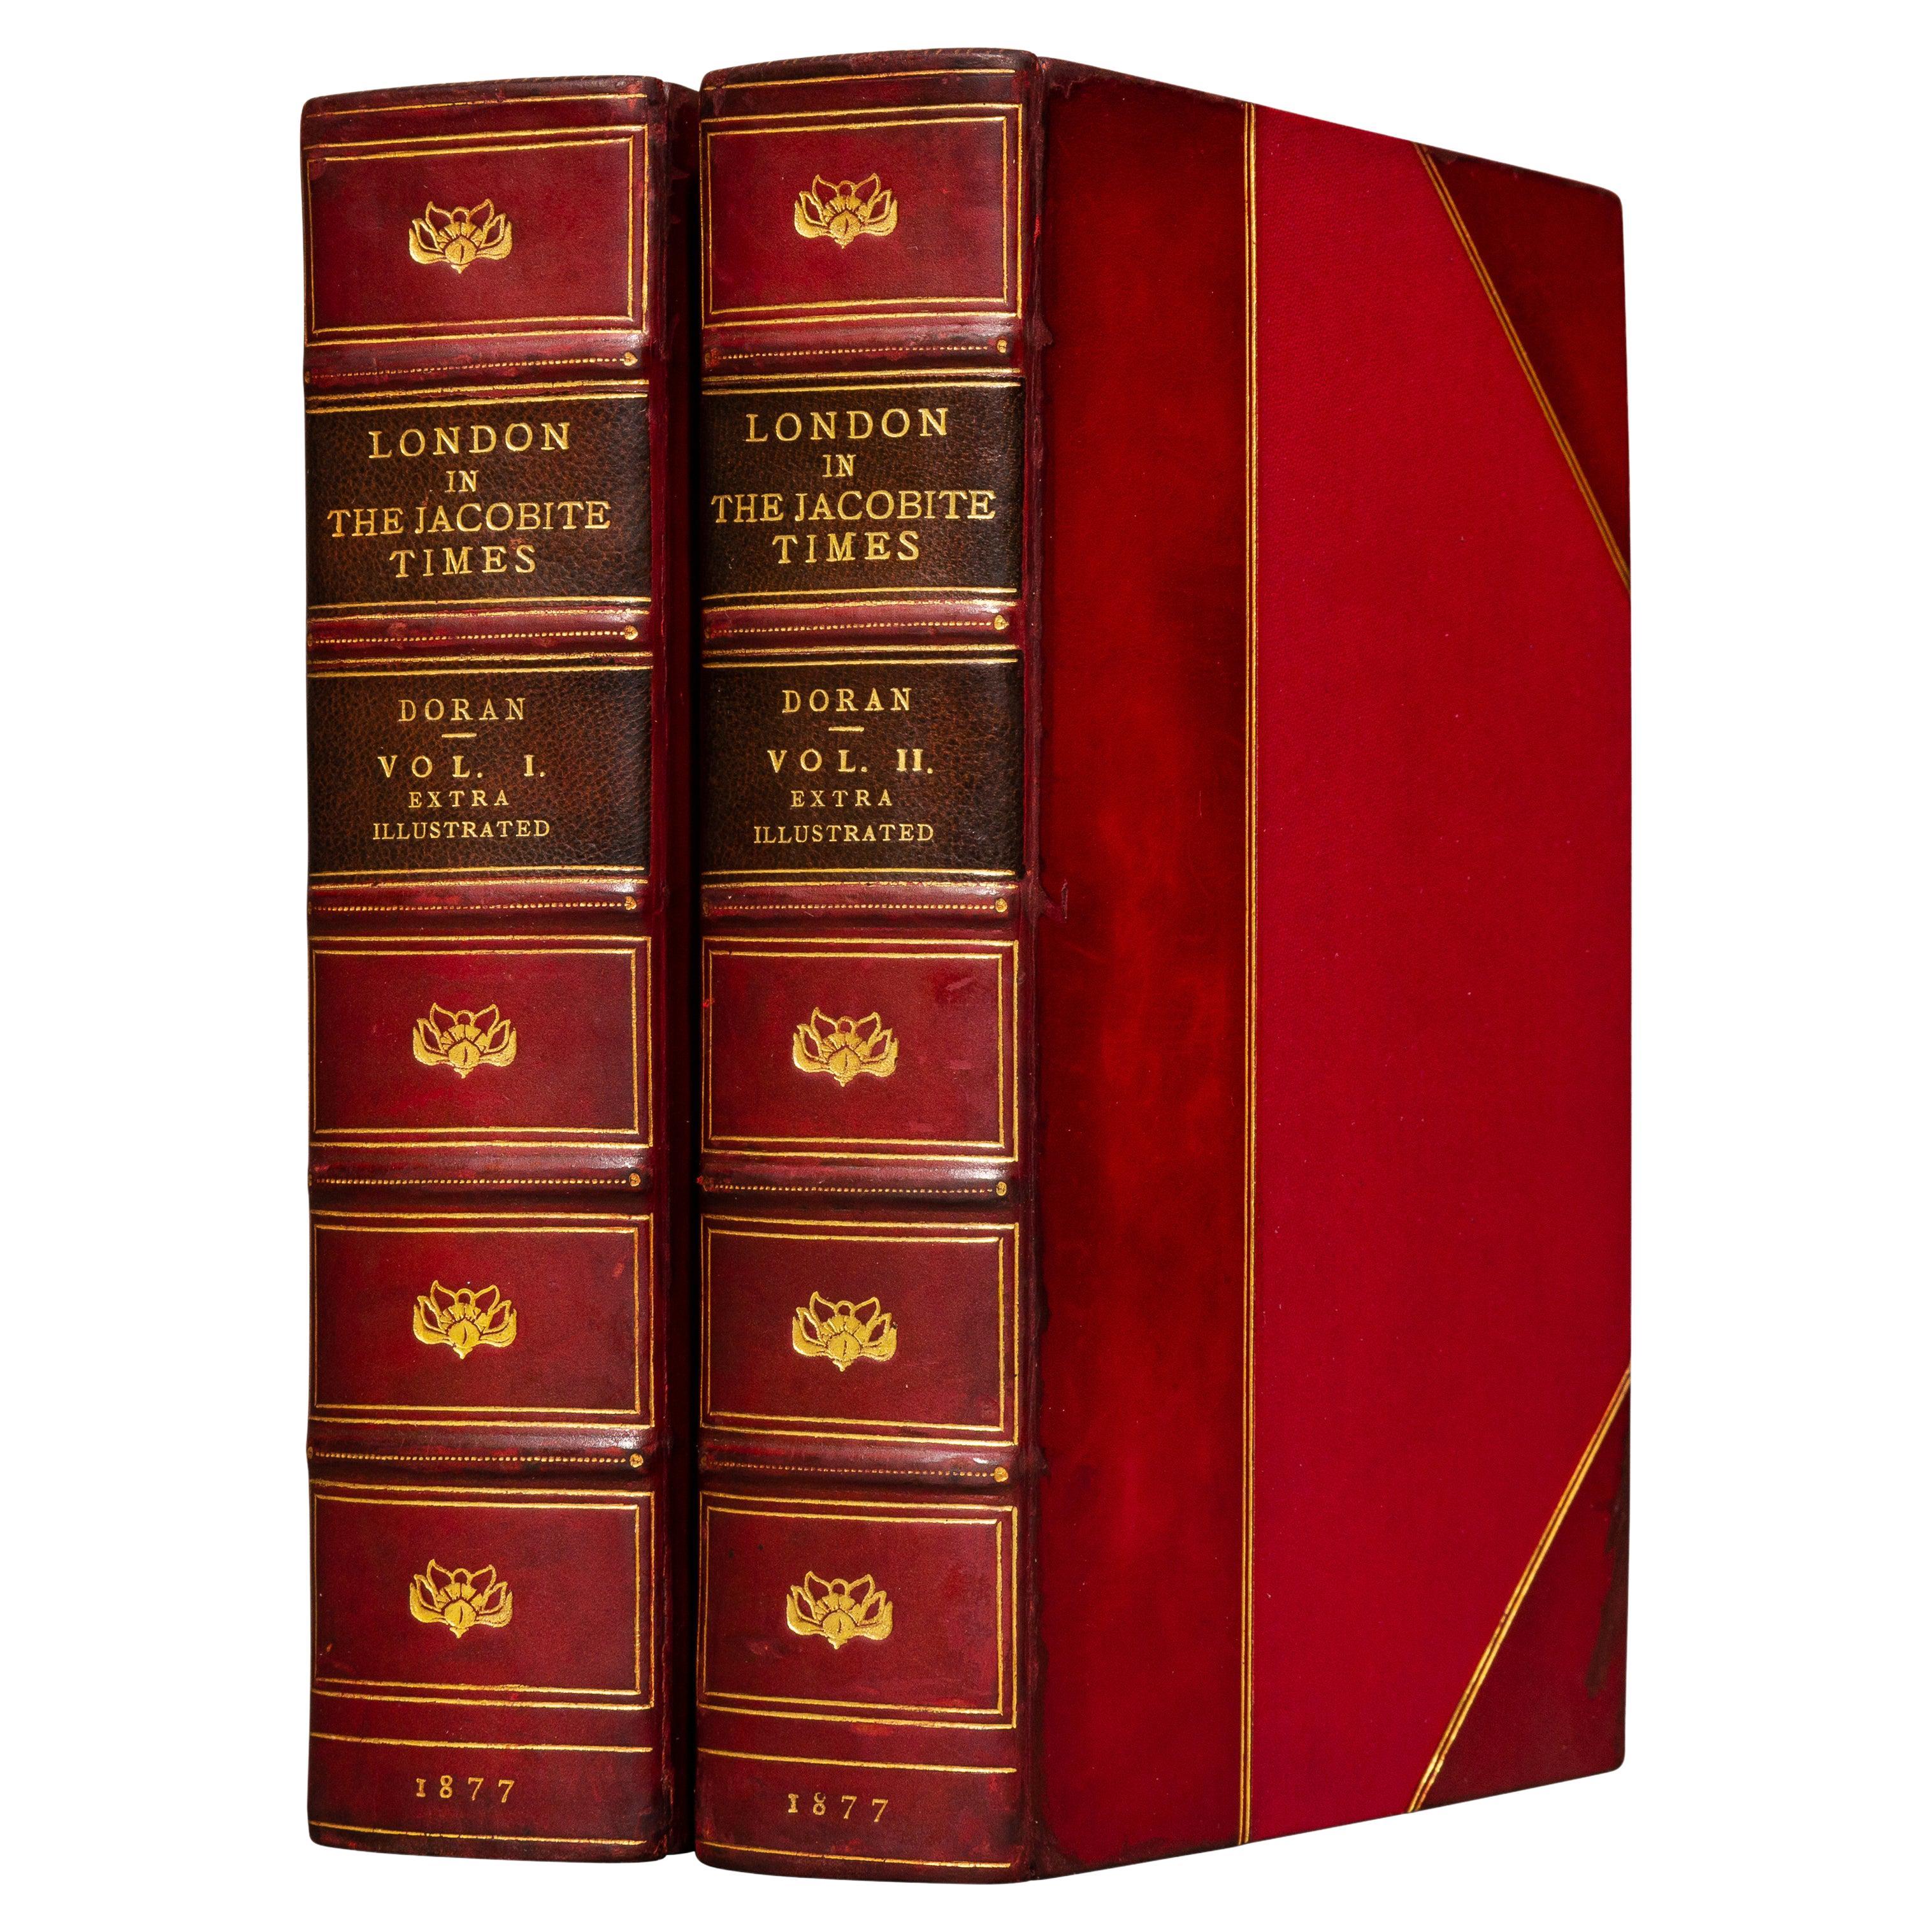 2 Volumes, Dr. Doran, London in the Jacobite Times